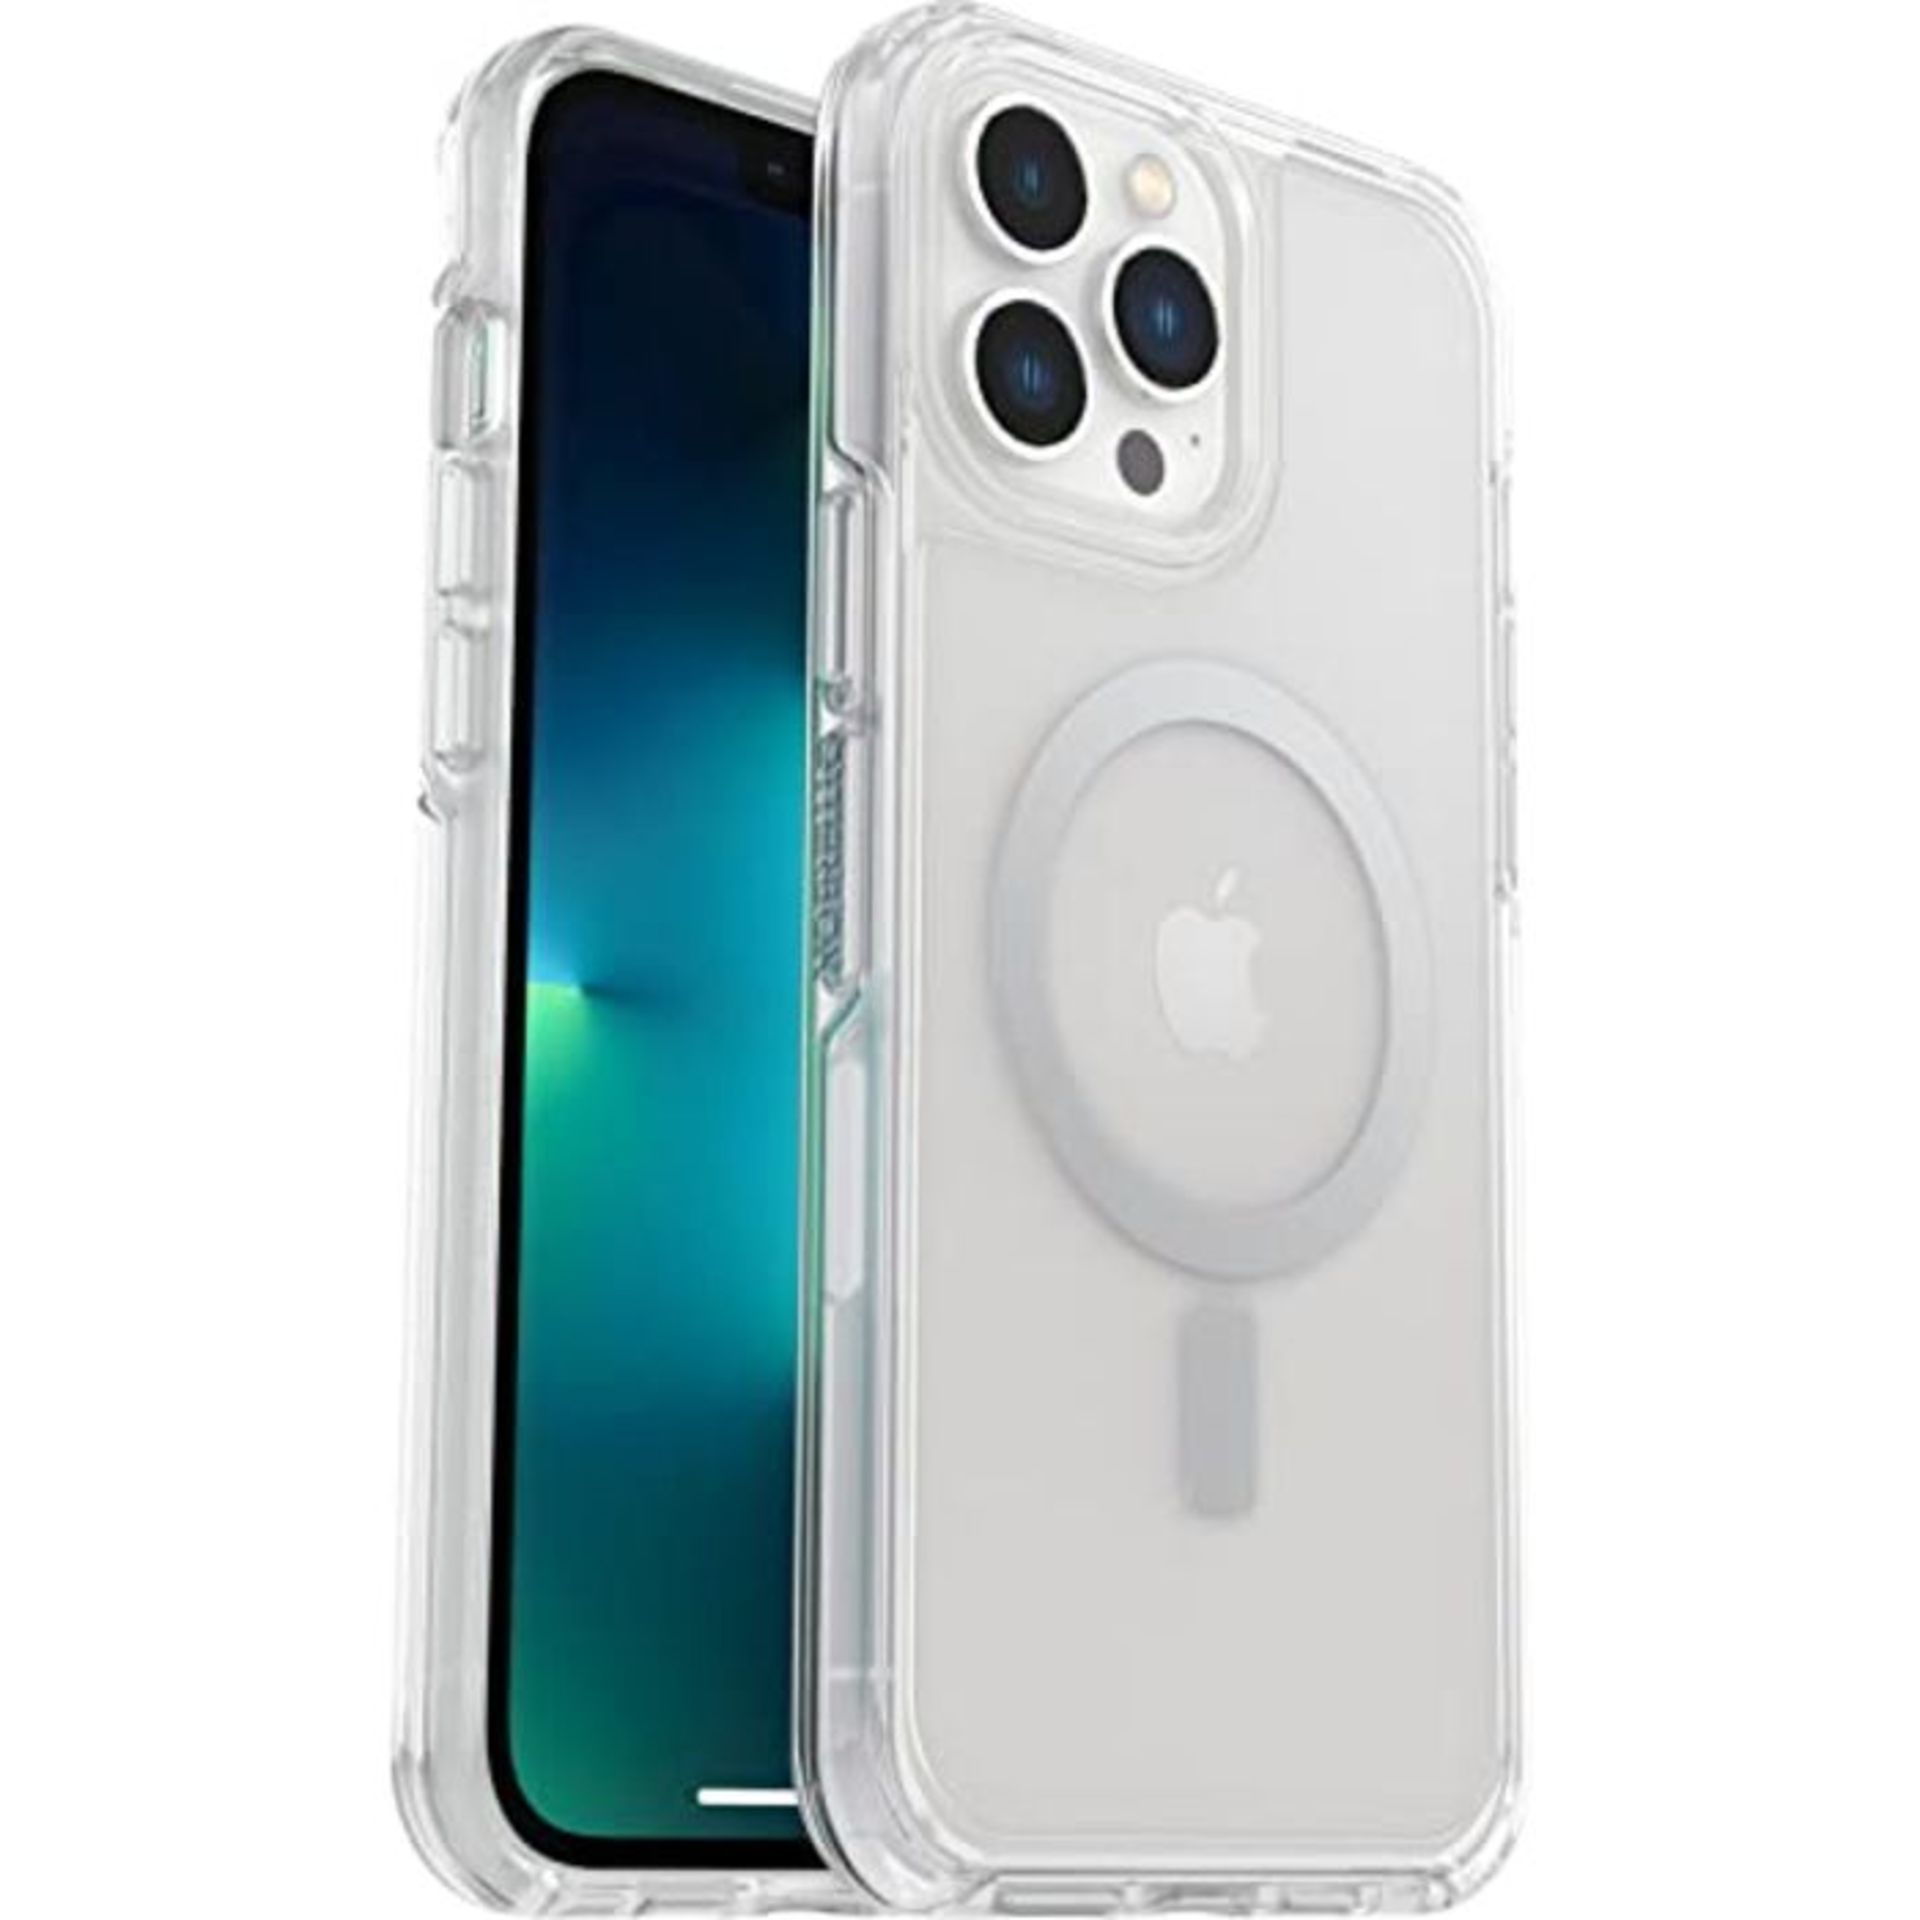 OtterBox Symmetry+ Clear Case for iPhone 13 Pro Max / iPhone 12 Pro Max for MagSafe, S - Image 3 of 6